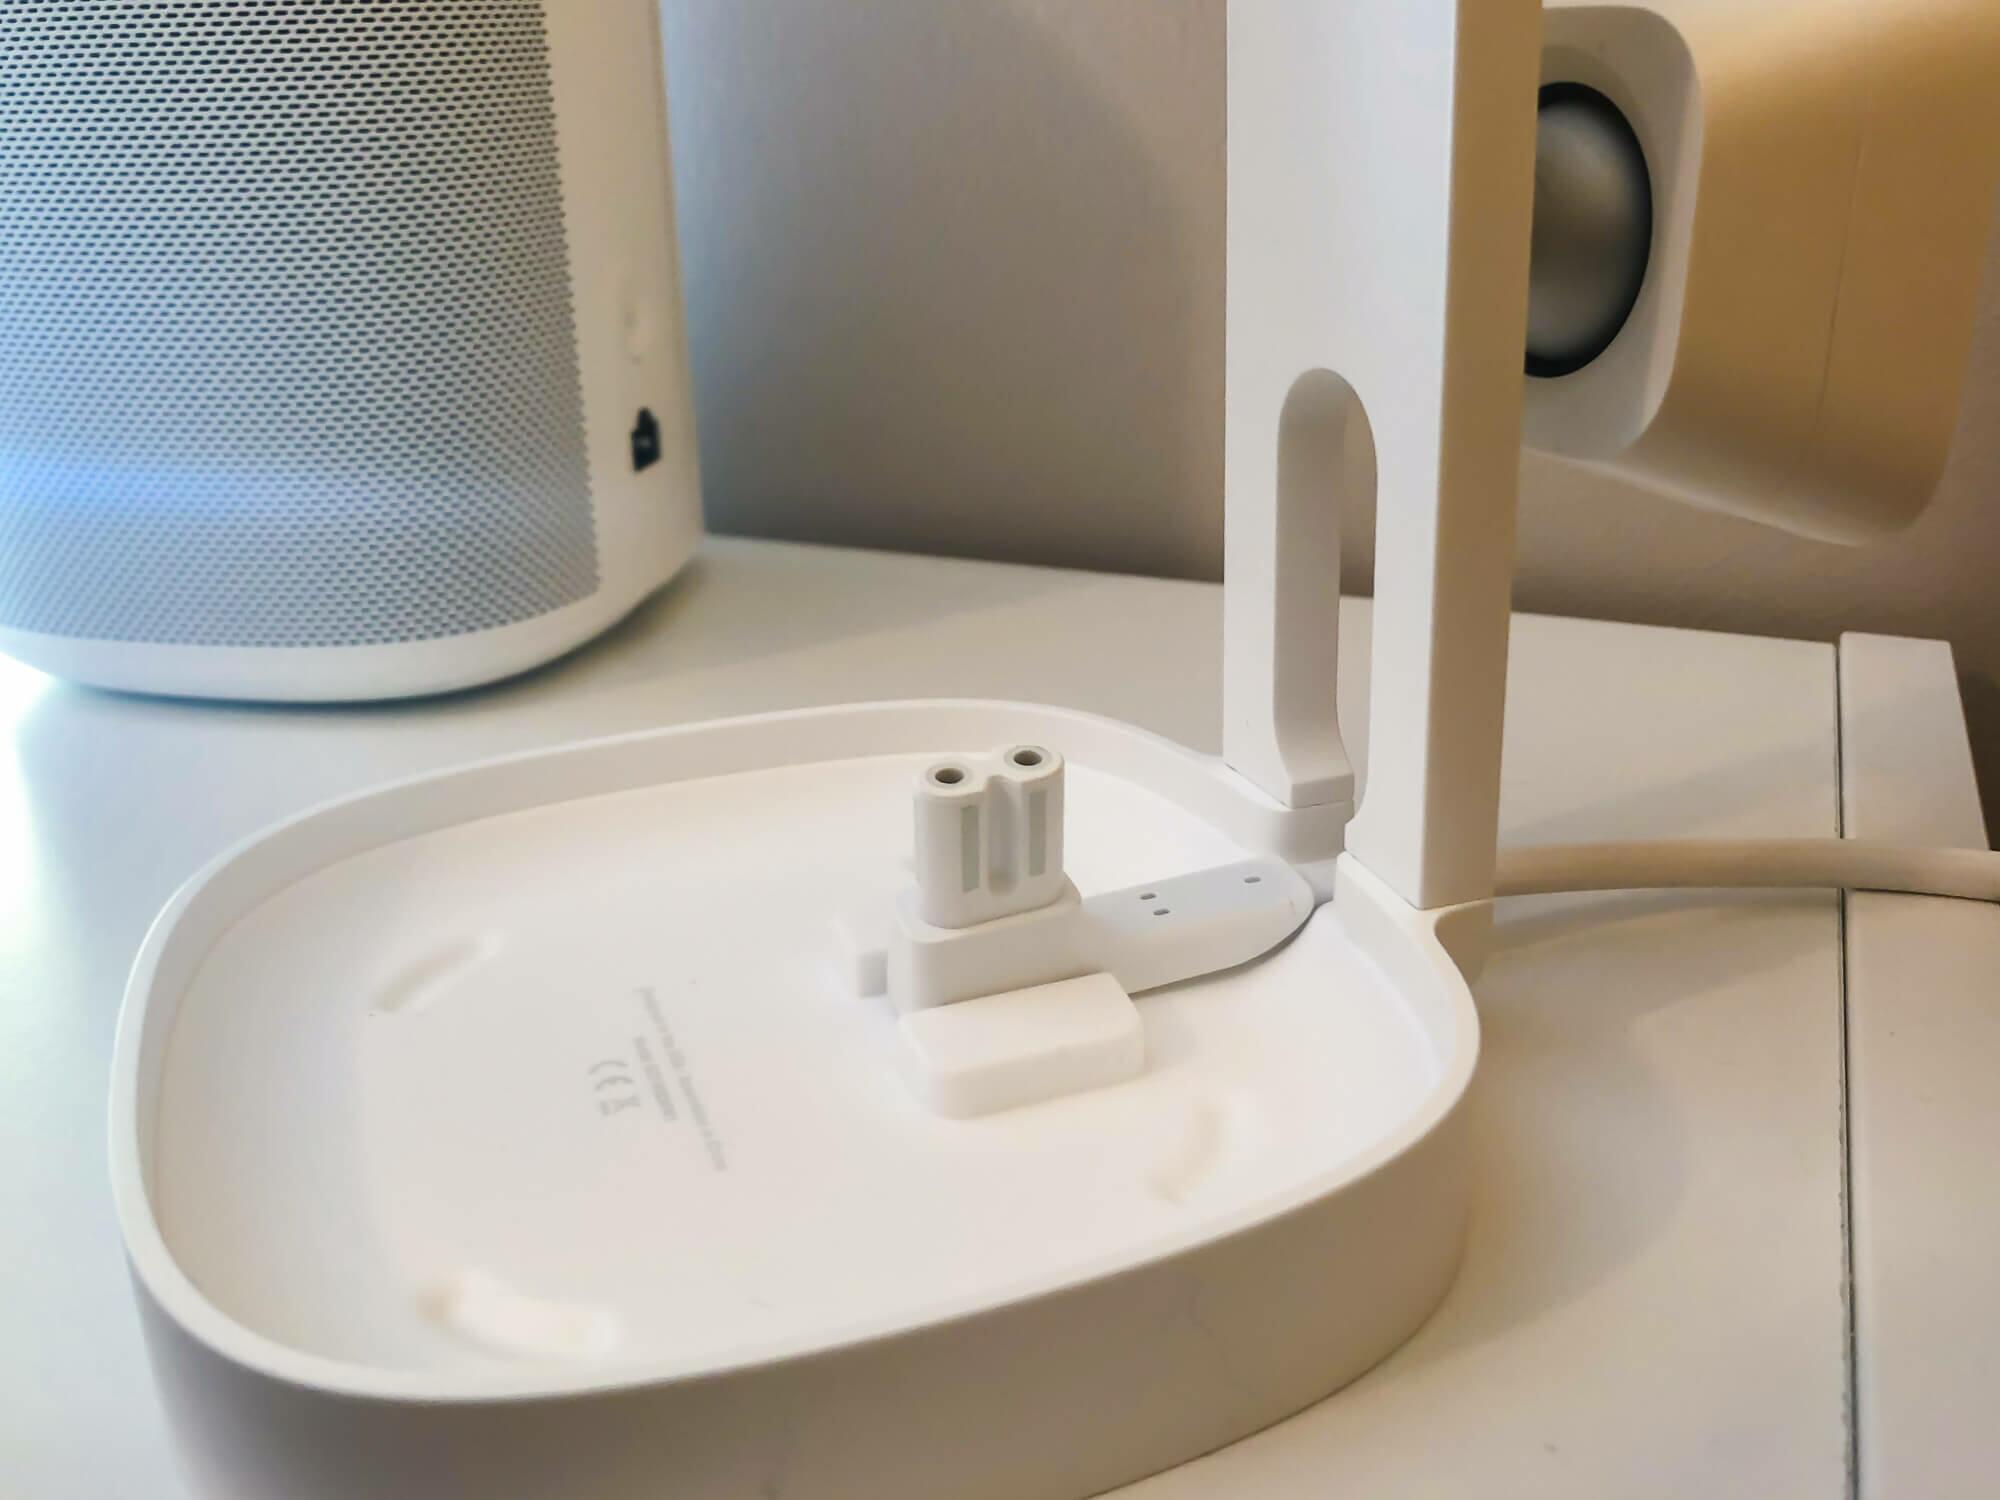 Feed the Sonos One SL cable through the hole, and the speaker beautifully sits on top